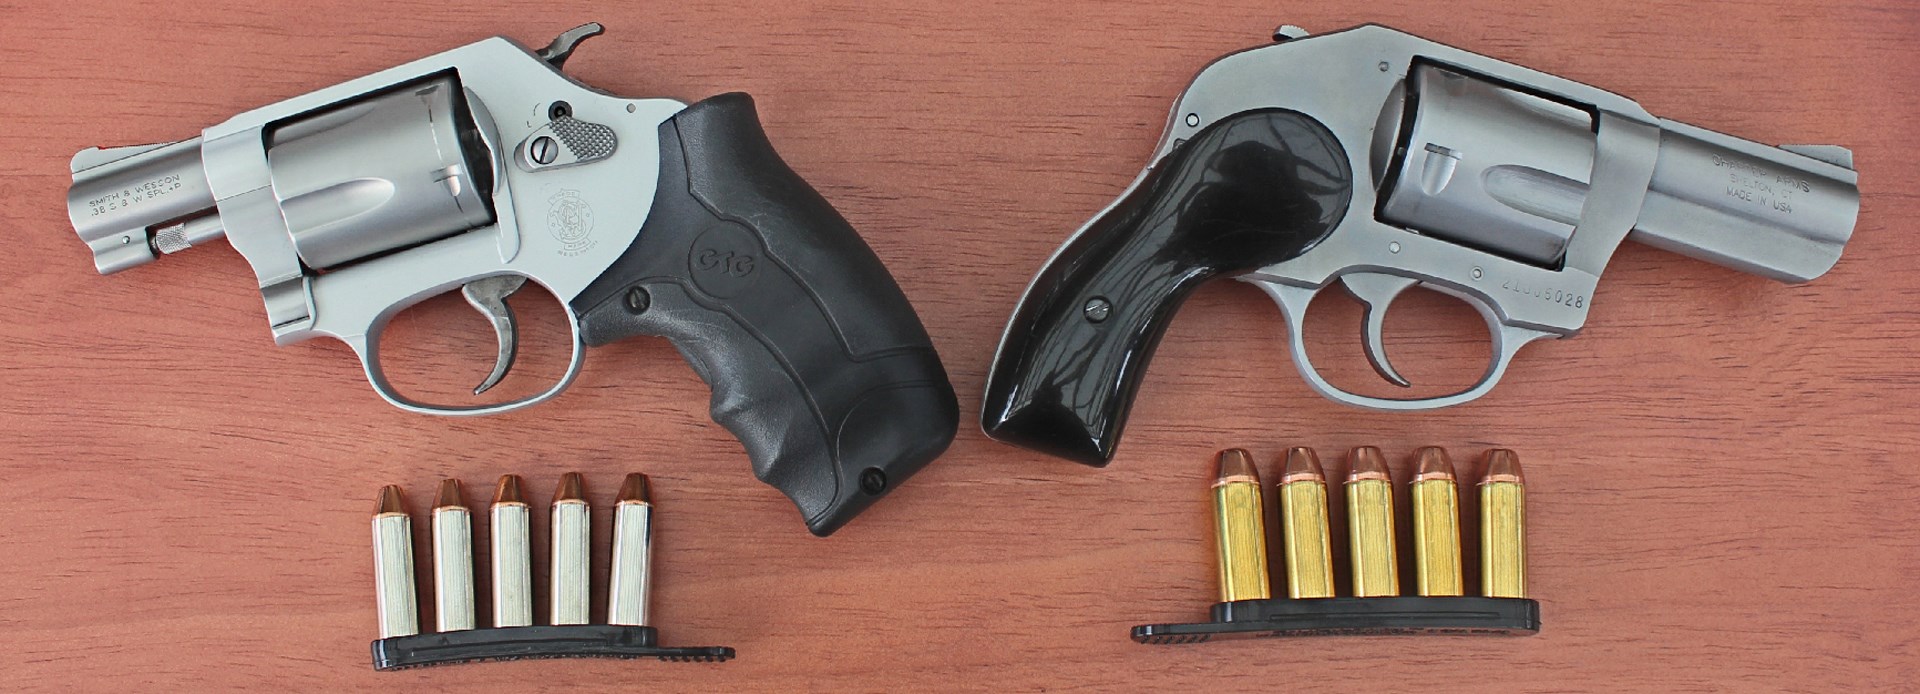 smith and wesson j-frame left compared to right charter arms bulldog guns revolvers with ammunition on wood table